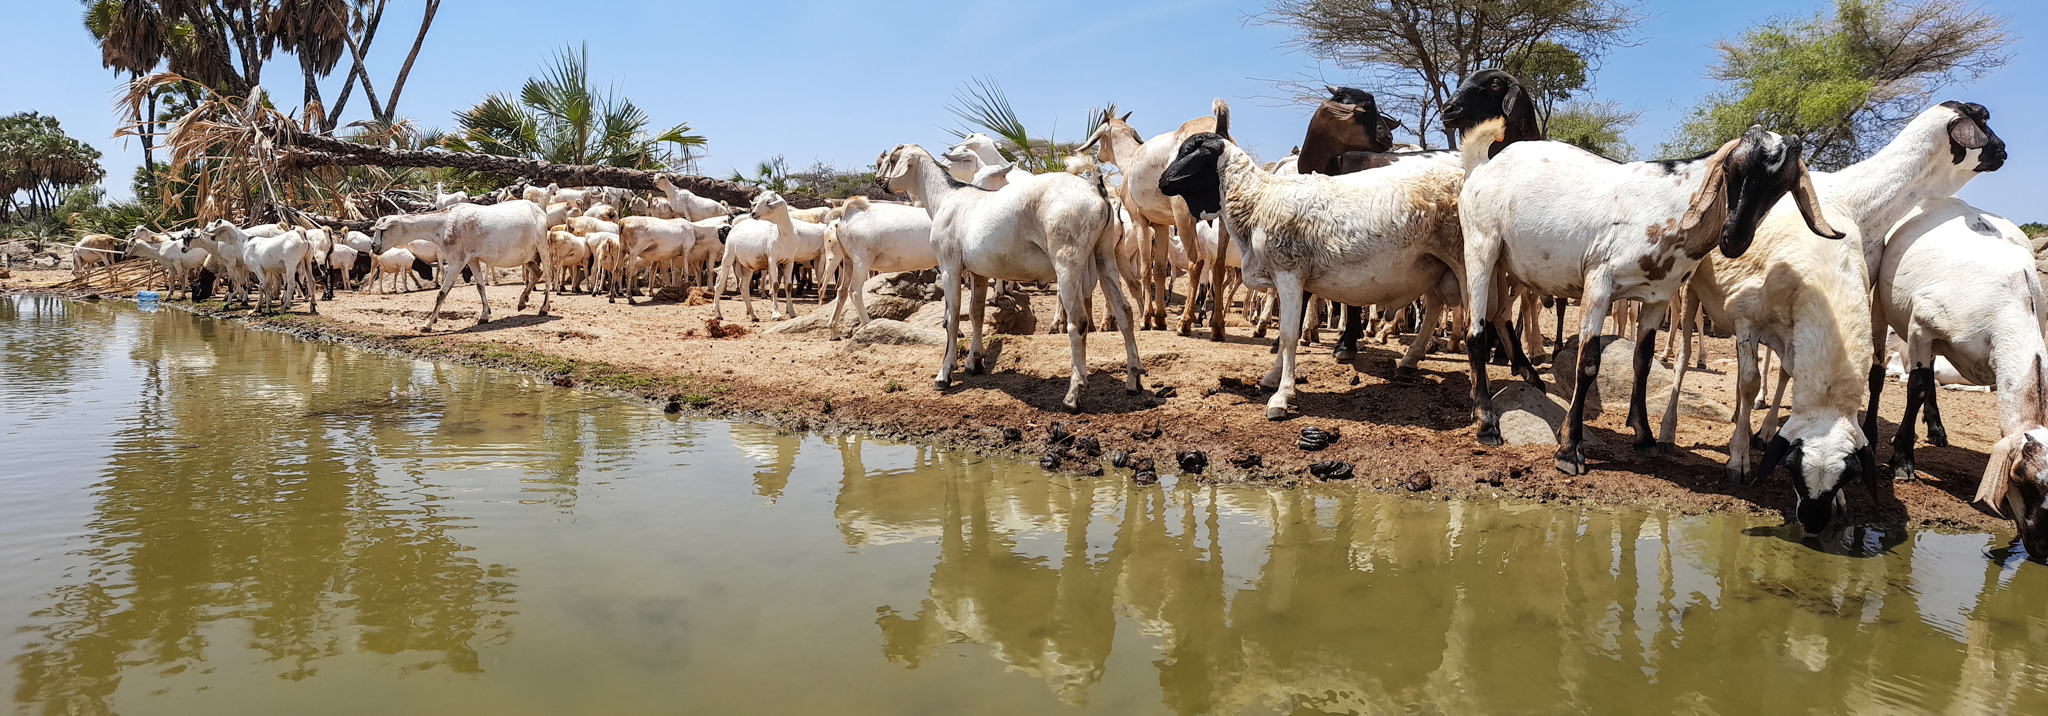 Goats drink water at a drying river in Isiolo county, Kenya